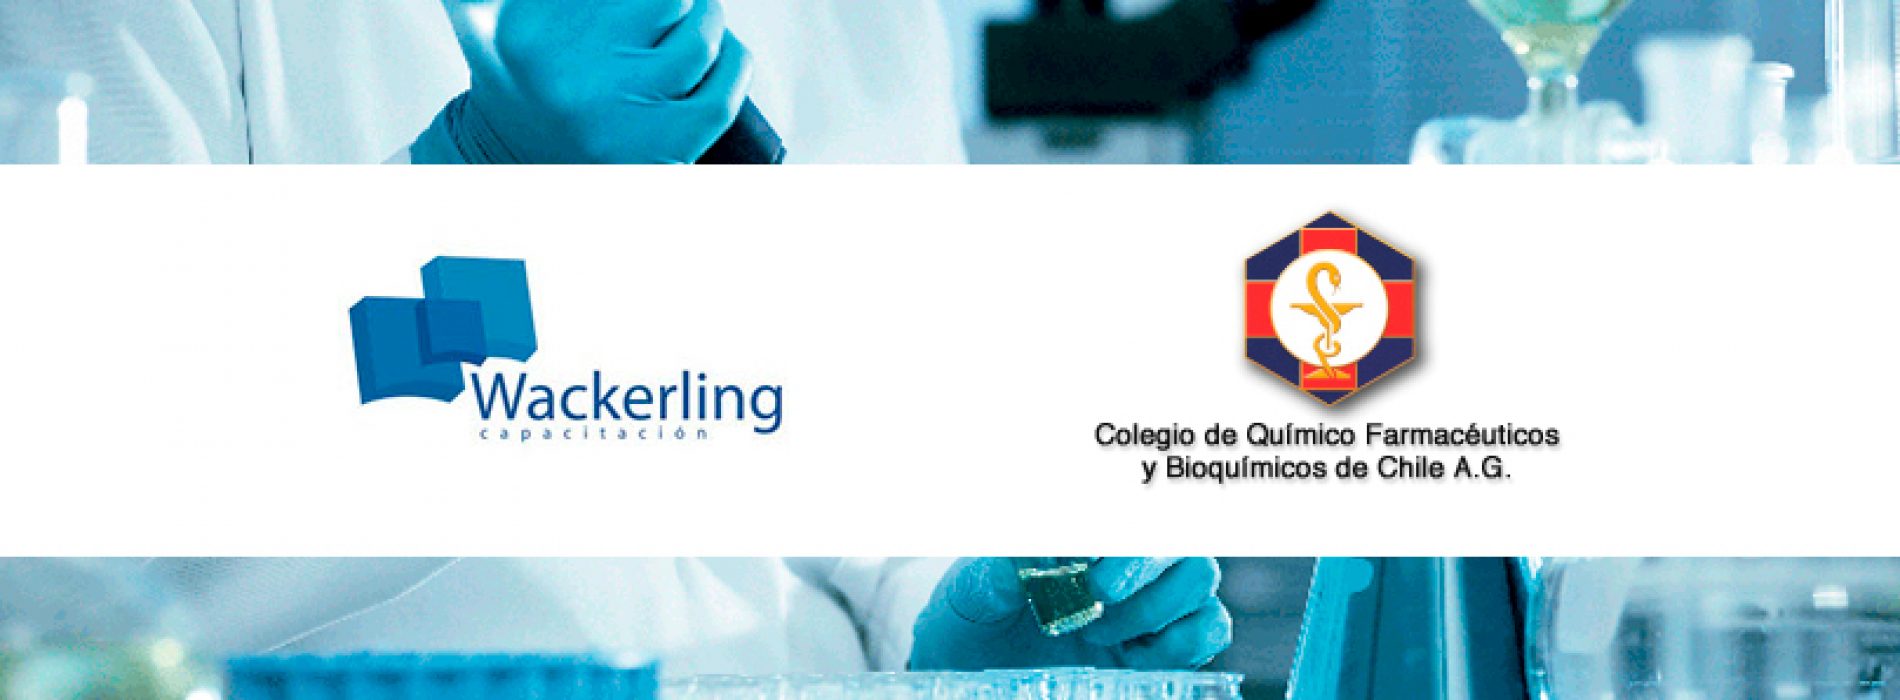 August course "Implementation of good documentation practices" / / Wackerling training and College of pharmaceutical chemists and biochemists of Chile